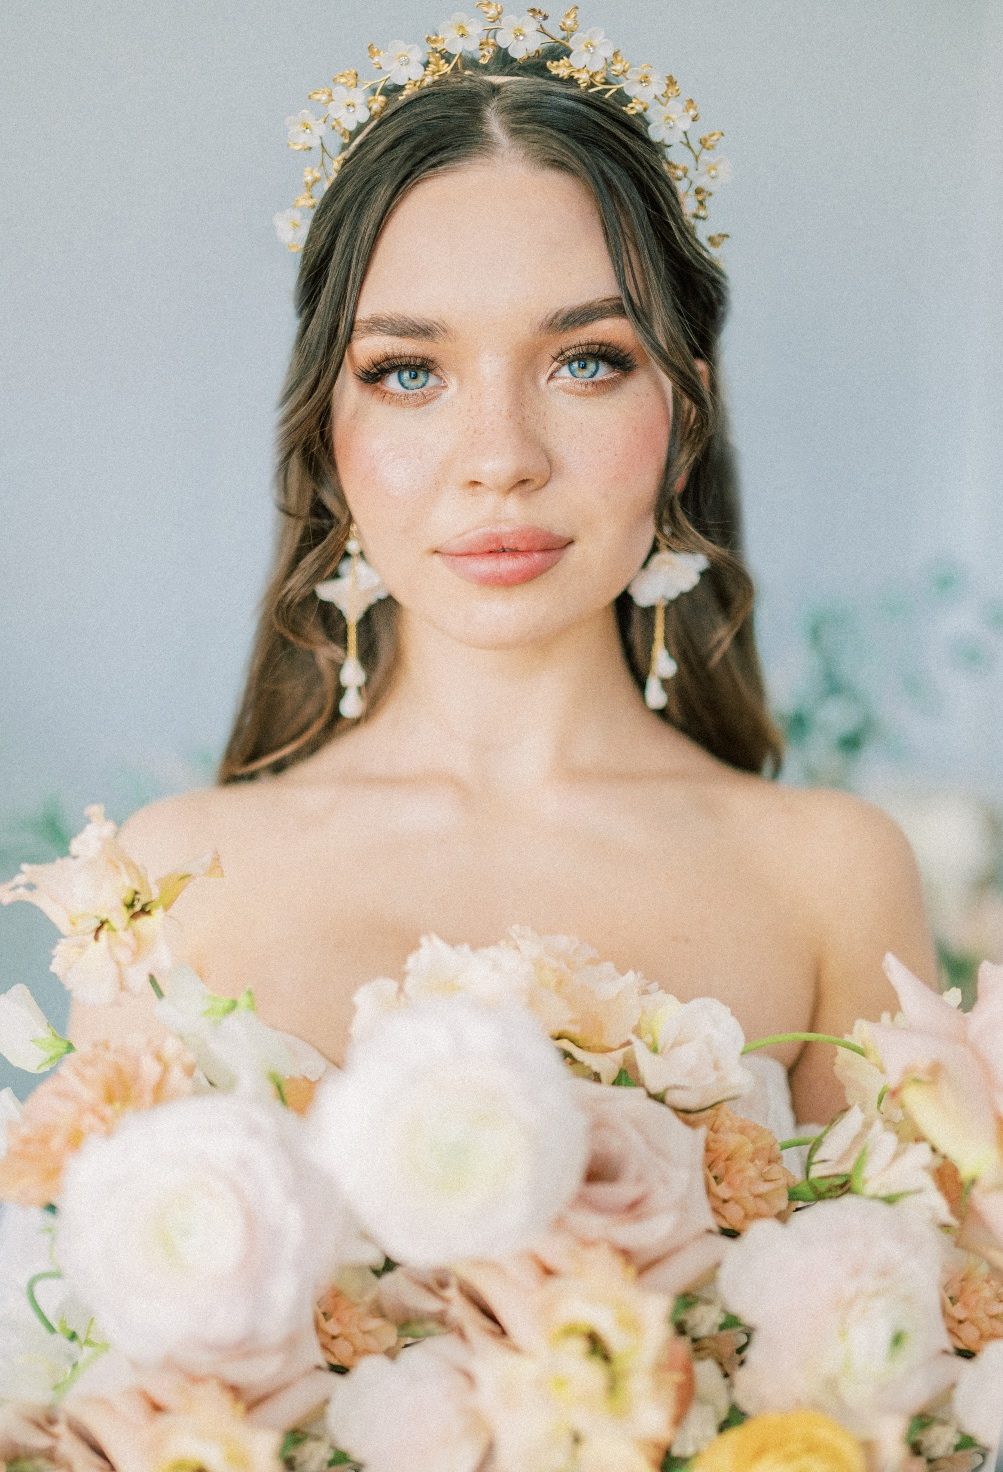 A close up of our radiant model, Uliana (@ulyashh_) with her gorgeous make up and earrings, showing just the top of her bridal bouquet